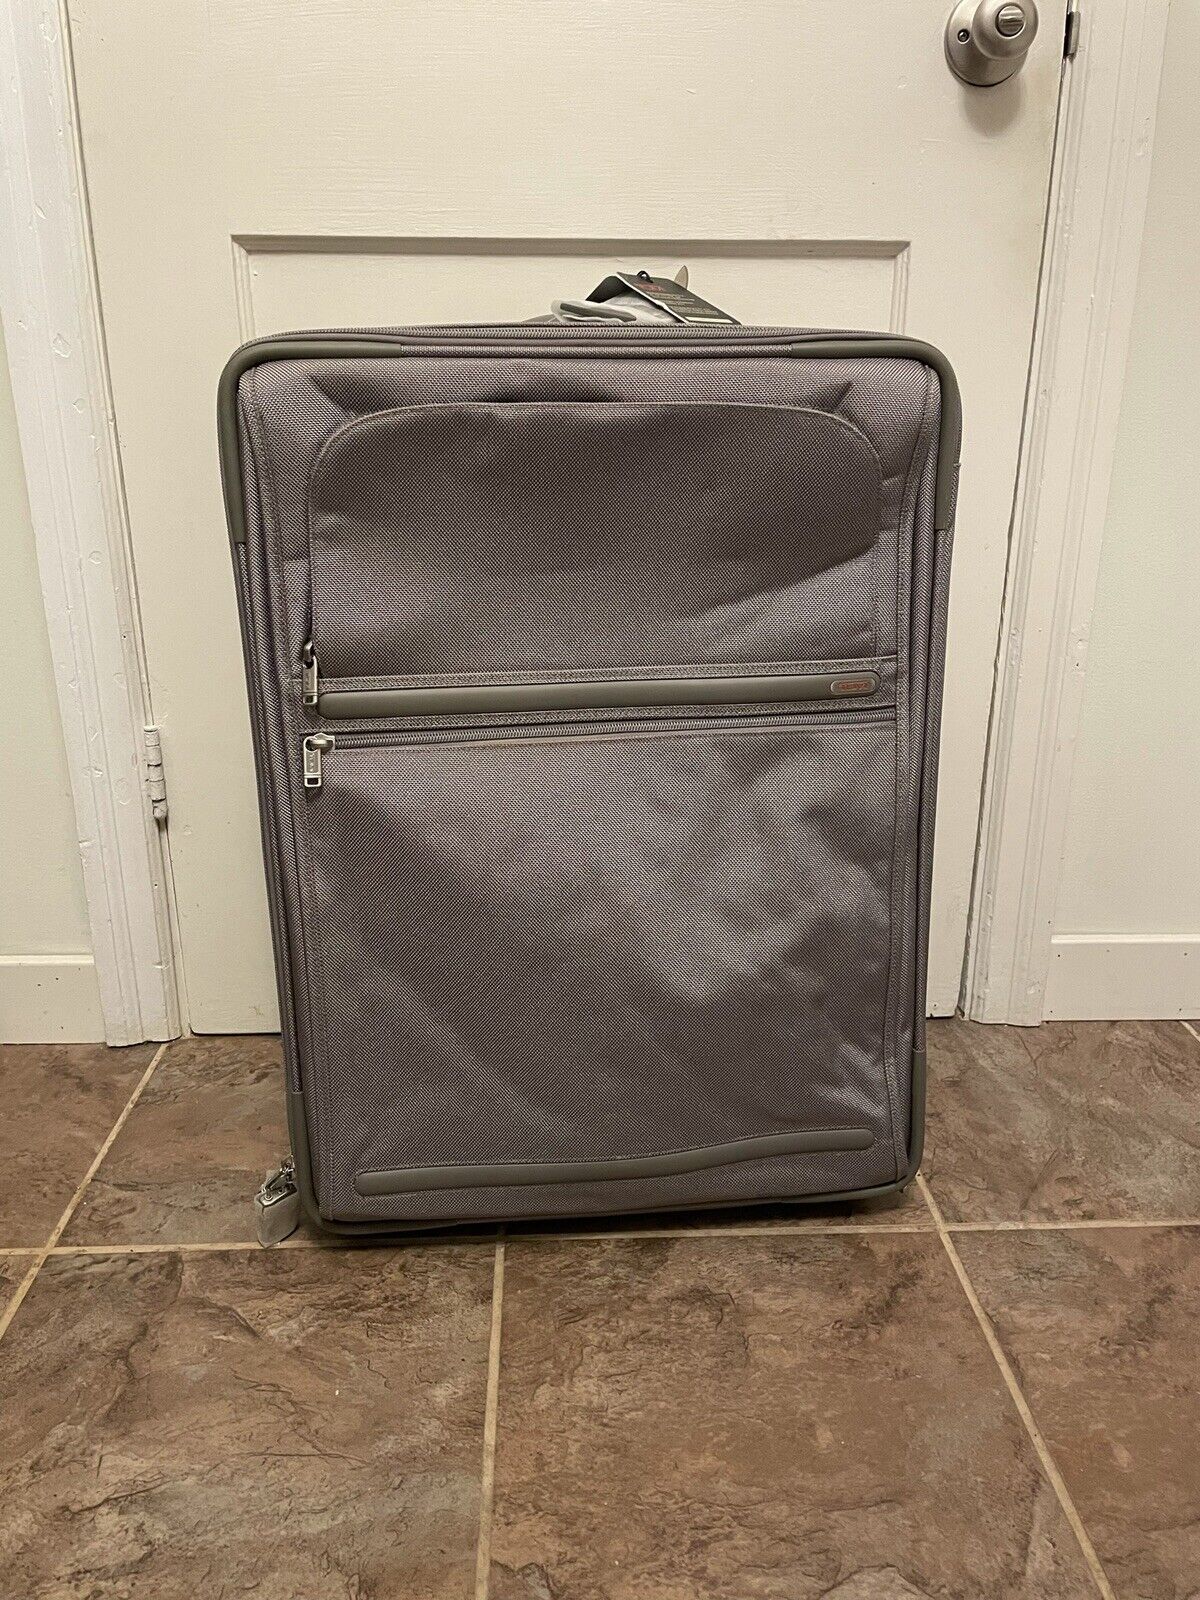 TUMI  Wheeled Expandable Short Trip Suitcase with defects  Silver tone